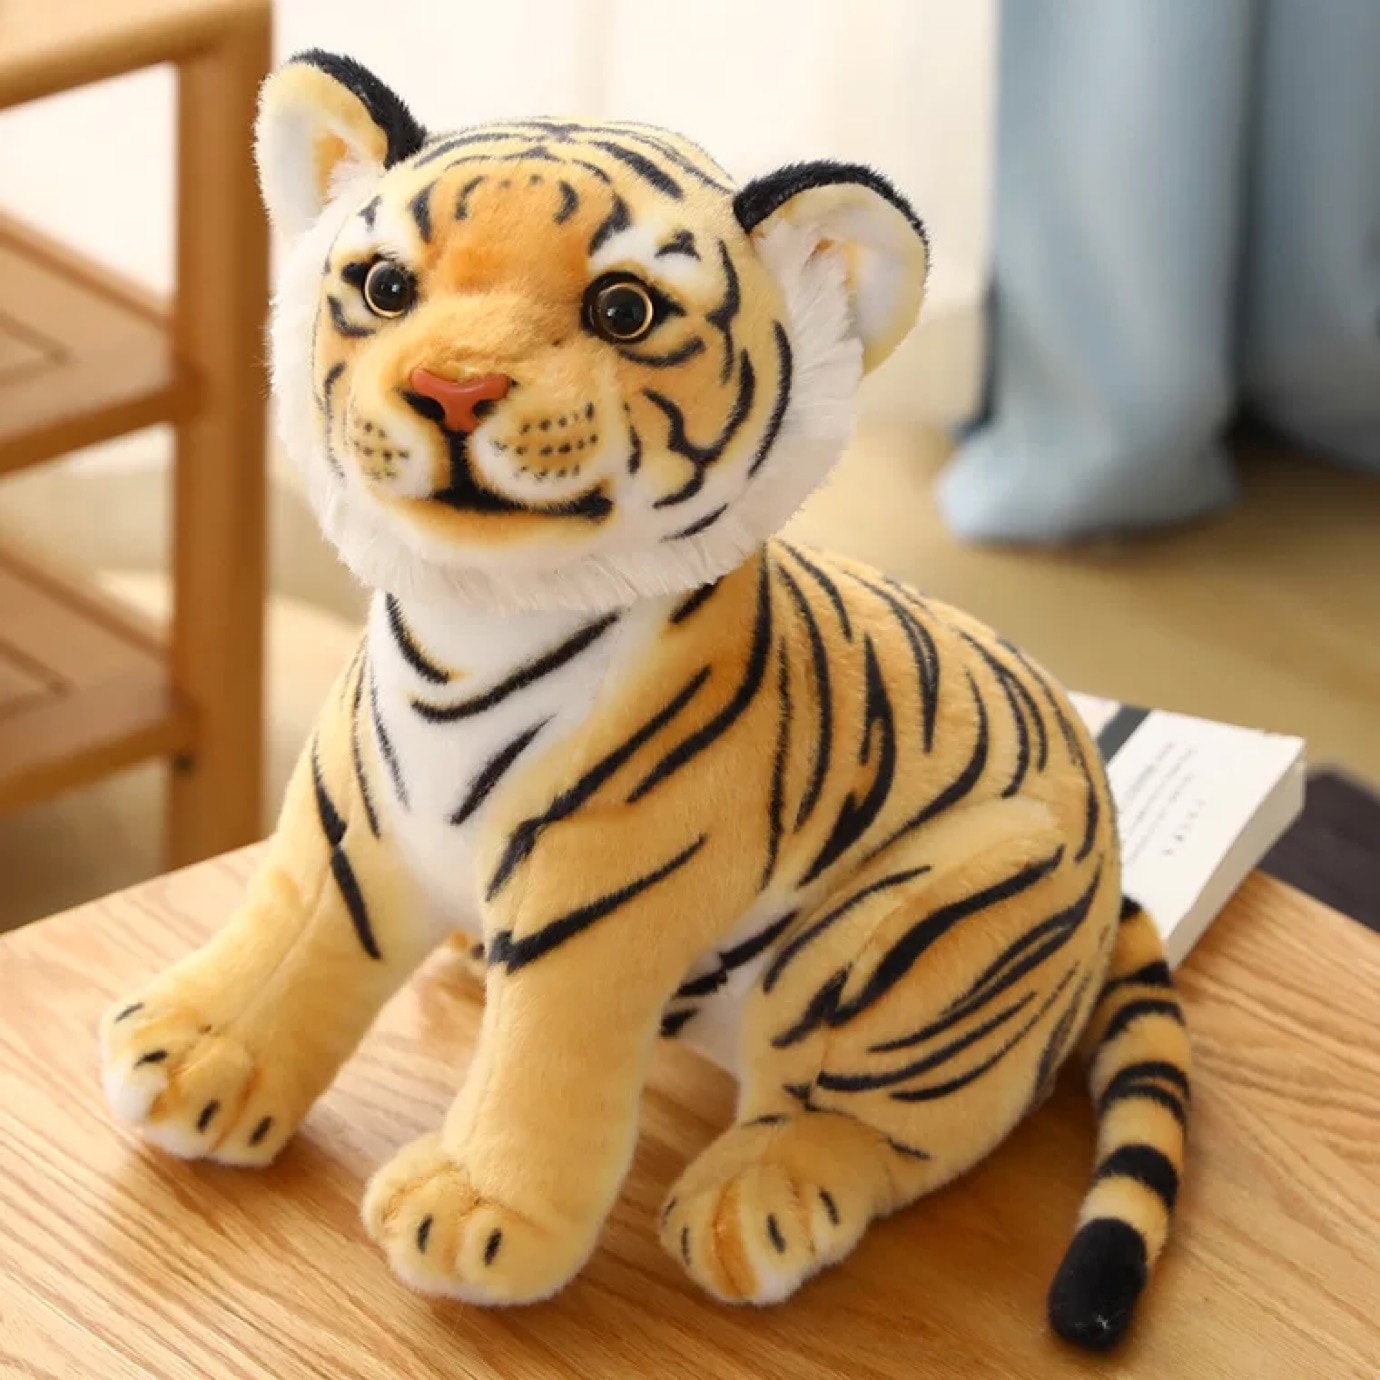 23cm Simulation Baby Tiger Plush Toy Stuffed Soft Wild Animal Forest Tiger Pillow Dolls For Kids 1